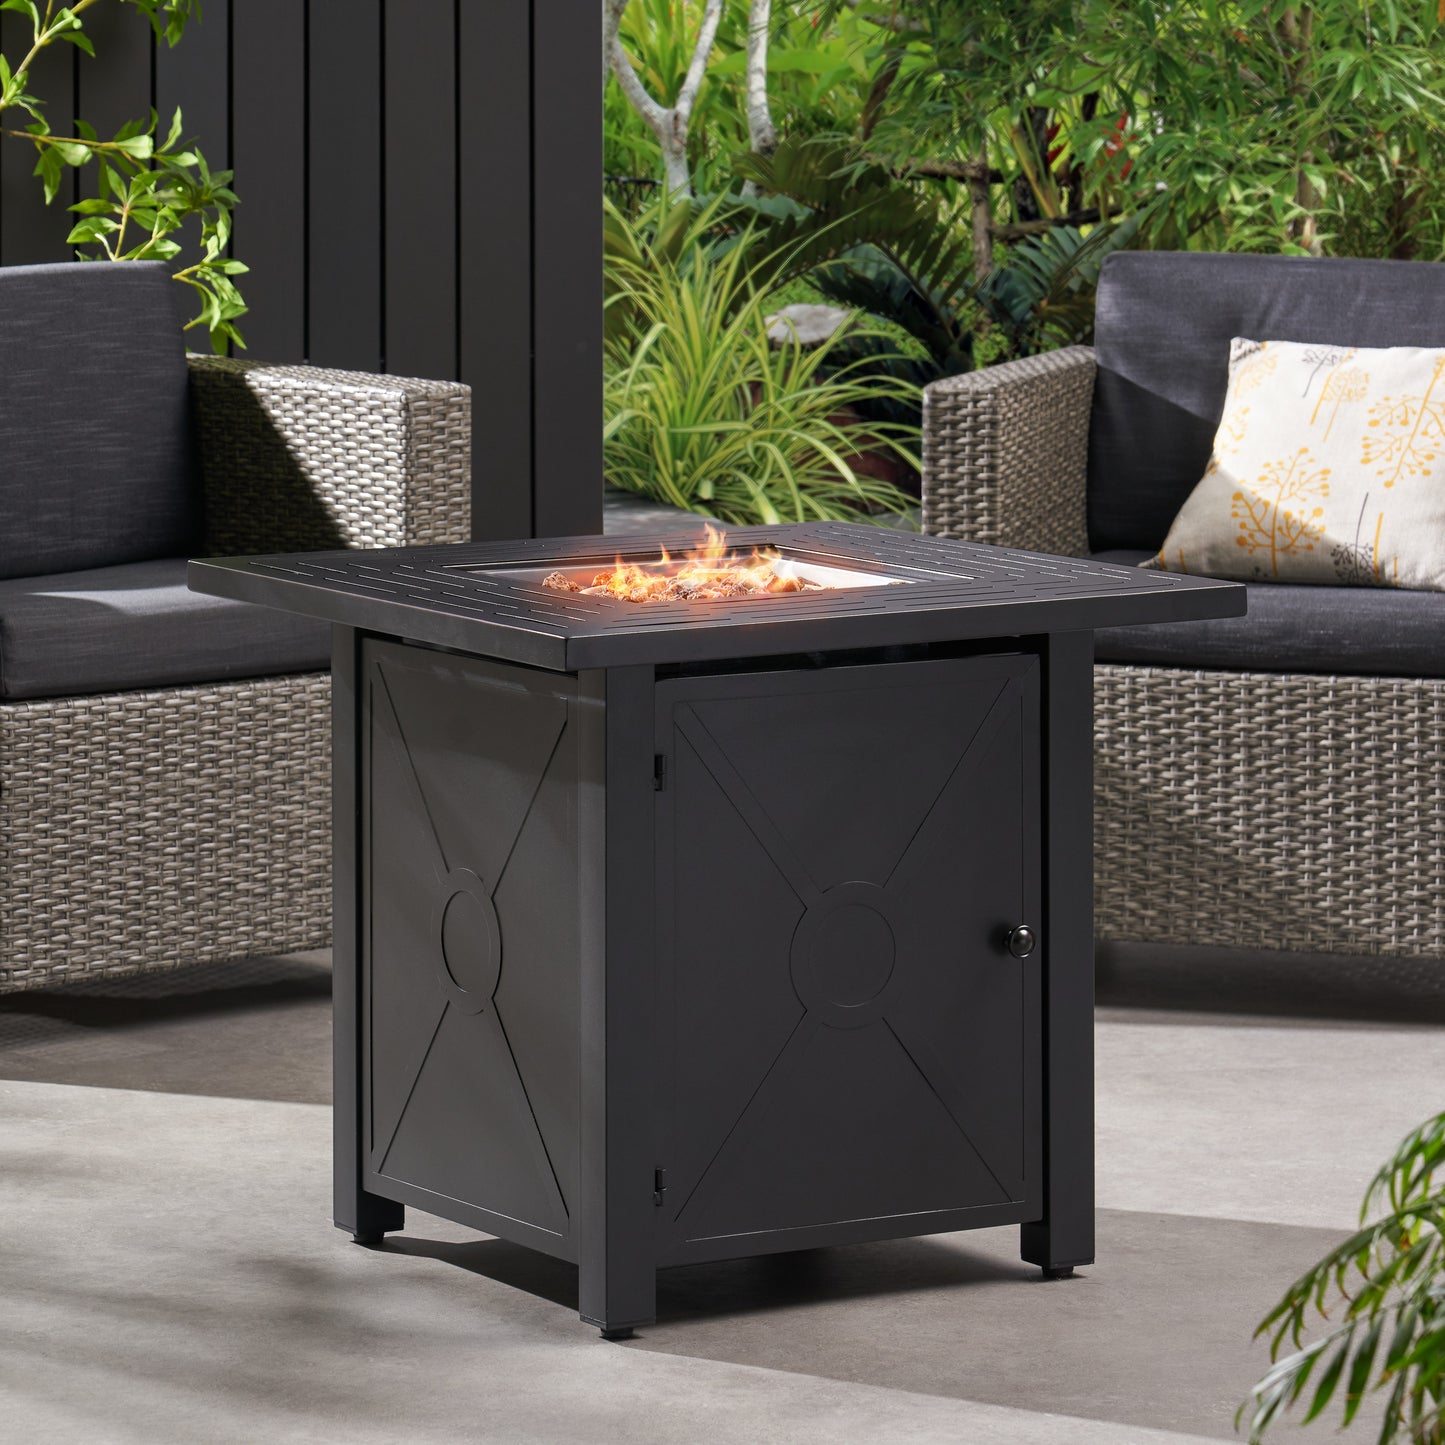 Doheny Outdoor 40,000 BTU Iron Square Fire Pit, Black